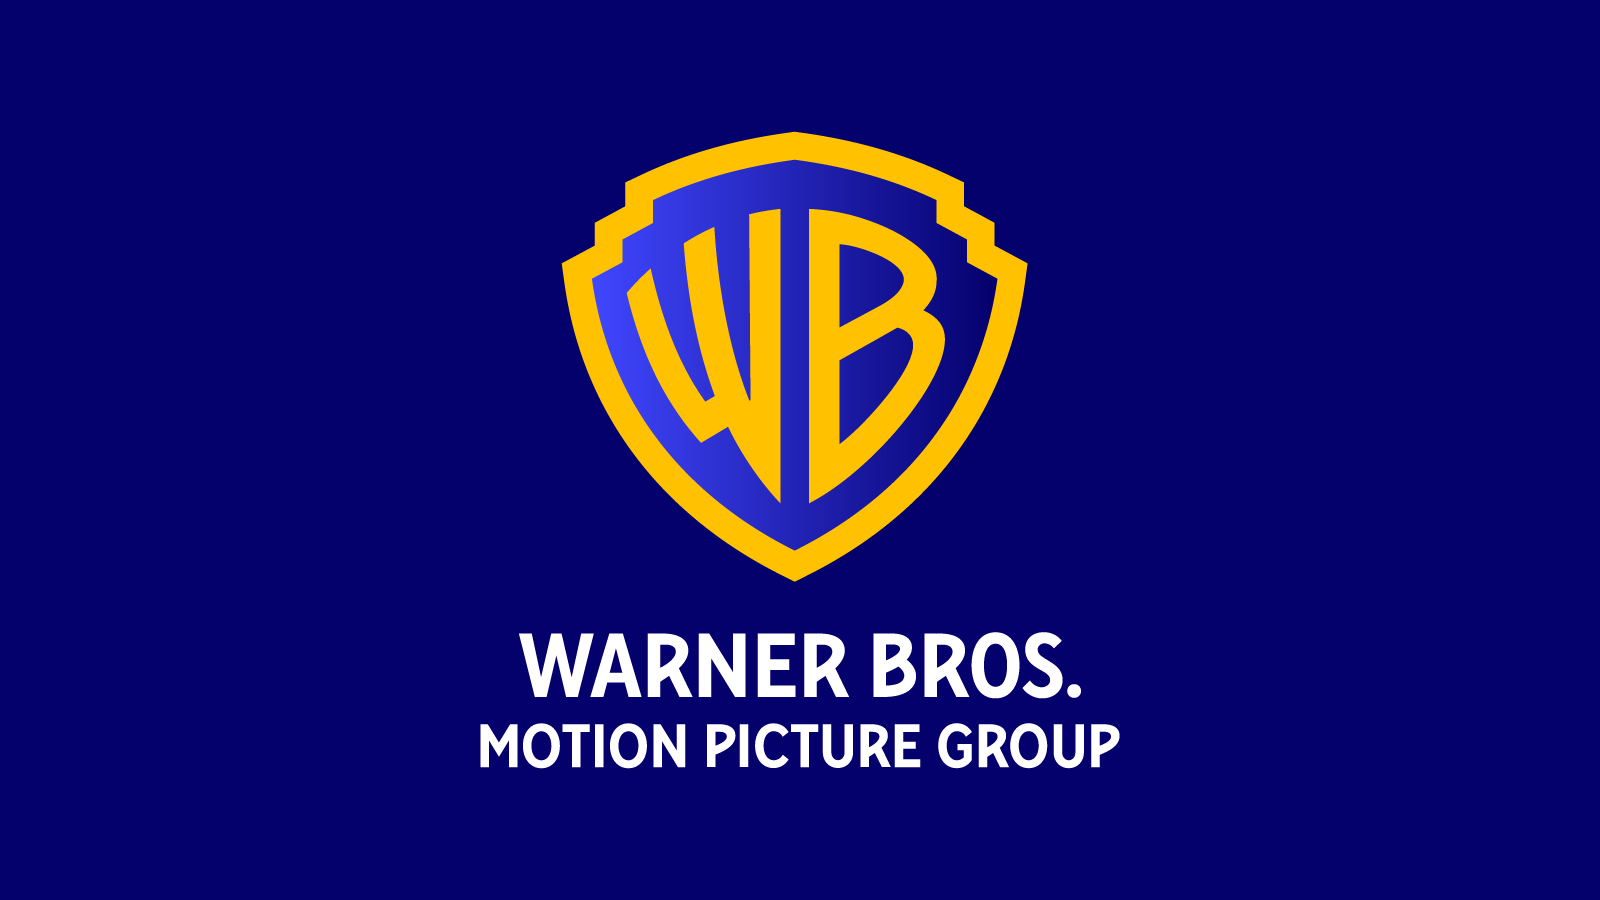 Warner Bros. Motion Picture Group And Tom Cruise To Jointly Develop And